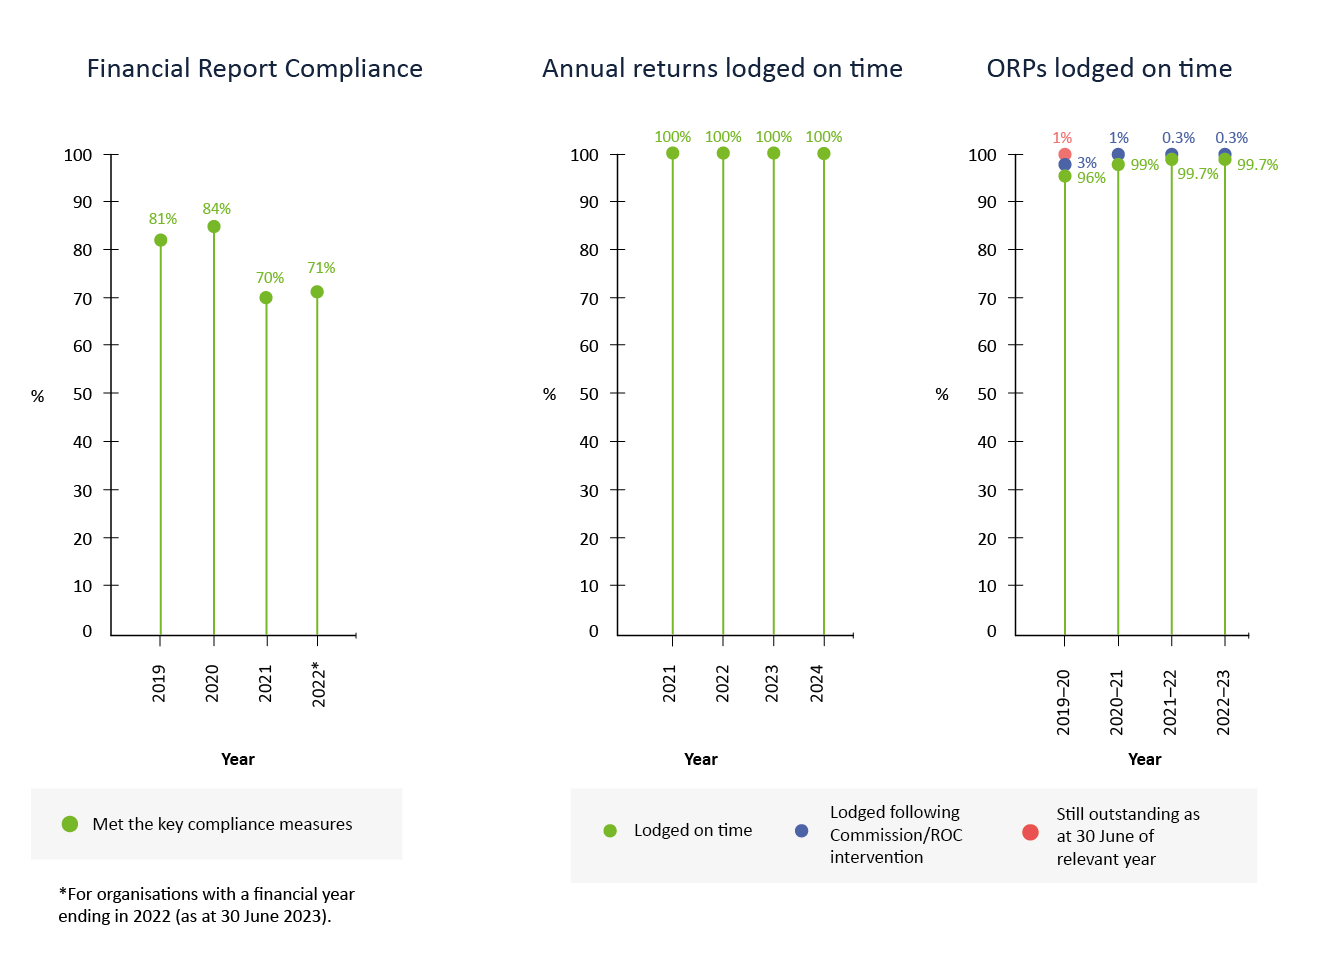  There are three line graphs. The first graph is titled 'Financial Report Compliance'. The percentage of organisations that met the financial reporting key compliance measures are, 81% for 2019, 84% for 2020, 70% for 2021 and 71% for 2022. The 2022 figure is for organisations with a financial year ending in 2022 (as at 30 June 2023). The second graph is titled 'Annual returns lodged on time'. For the years, 2021–2024 the percentage of annual returns lodged on time is 100%. The third graph is titled 'ORPs lodged on time'. For 2019–20, the figures are 96% lodged on time, 3% lodged following Commission/ROC intervention and 1% still outstanding as at 30 June of the relevant year. For 2020–21, 99% lodged on time and 1% lodged following Commission/ROC intervention. For 2021–22 and 2022–23, 99.7% of ORPs were lodged on time and 0.3% lodged following Commission/ROC intervention.